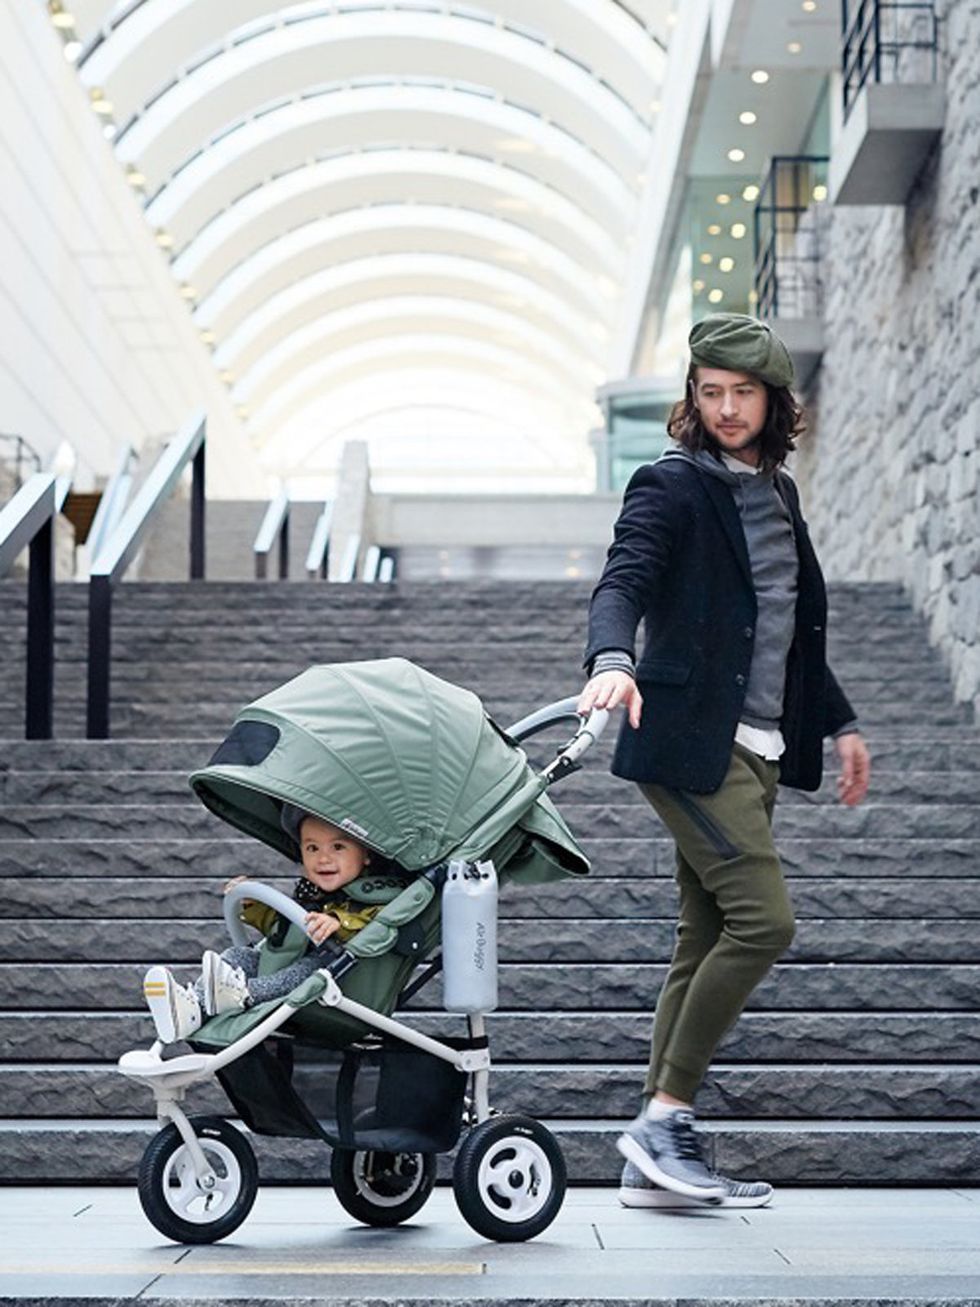 Wheel, Product, Baby carriage, Trousers, Baby Products, Outerwear, Jacket, Style, Street fashion, Rolling, 